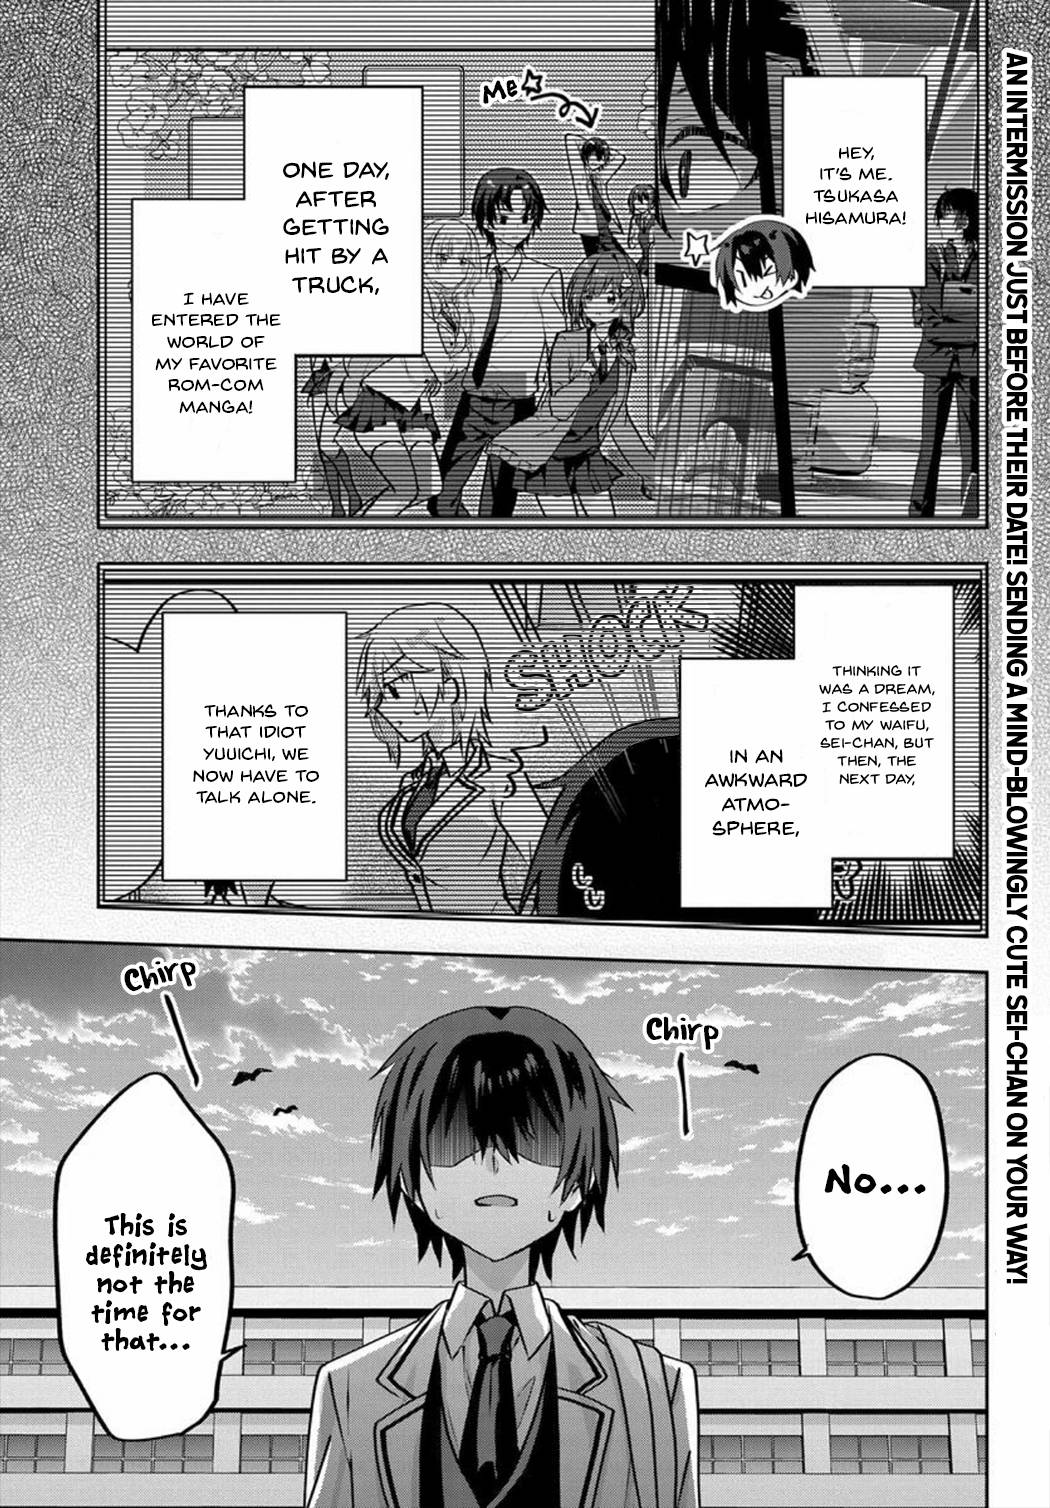 Since I’Ve Entered The World Of Romantic Comedy Manga, I’Ll Do My Best To Make The Losing Heroine Happy - chapter 3.5 - #1